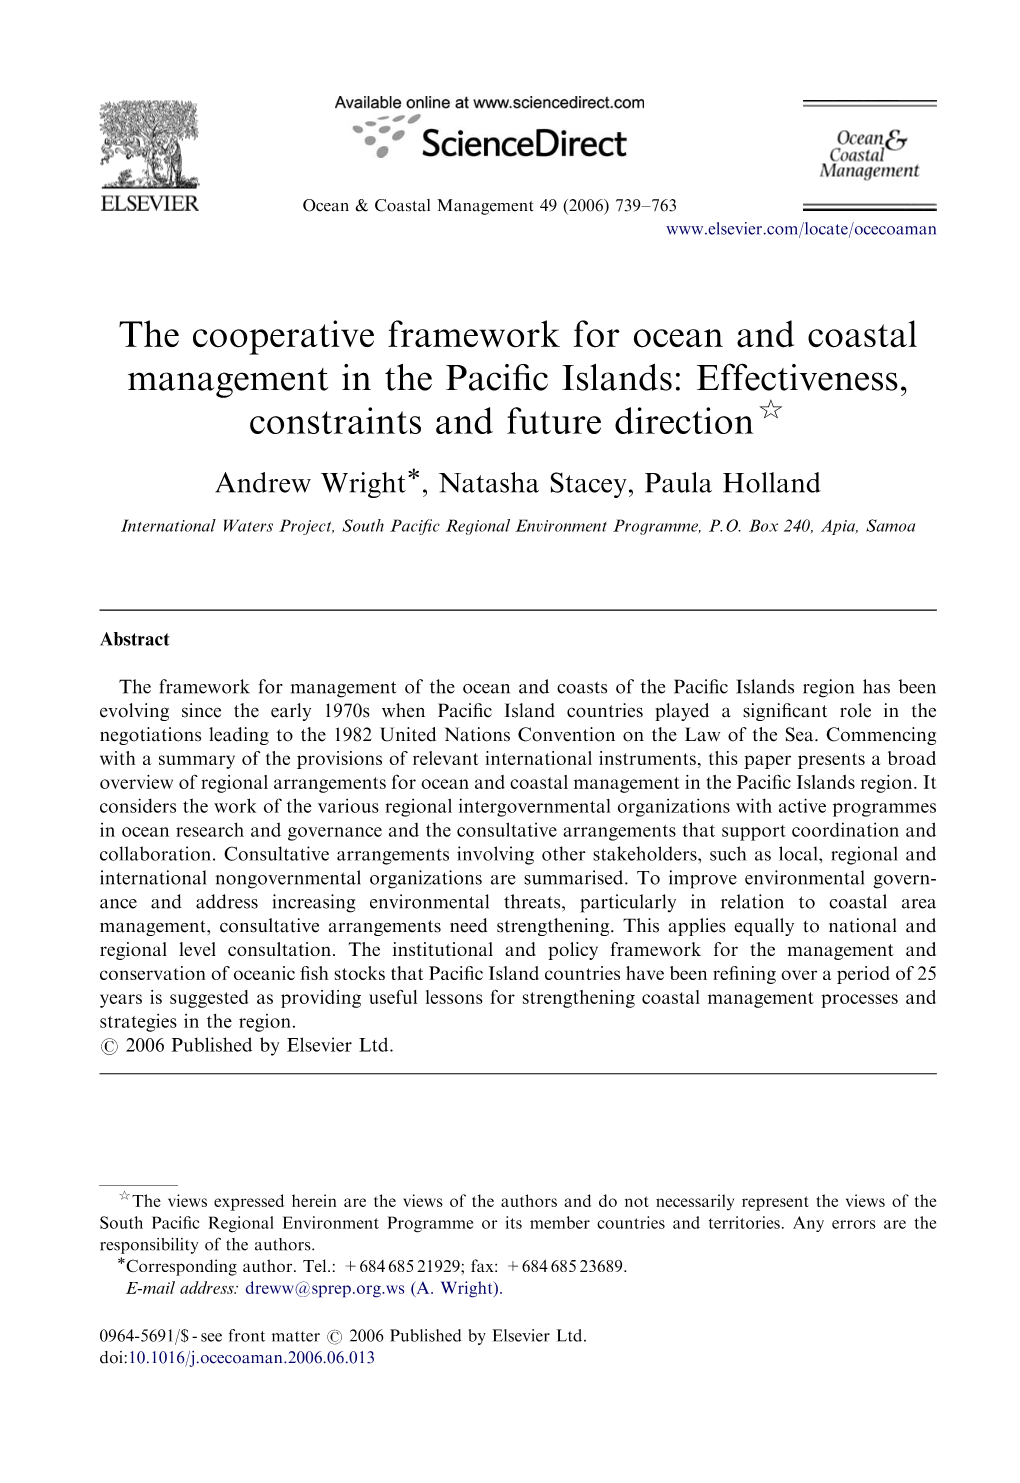 The Cooperative Framework for Ocean and Coastal Management in the Paciﬁc Islands: Effectiveness, Constraints and Future Direction$